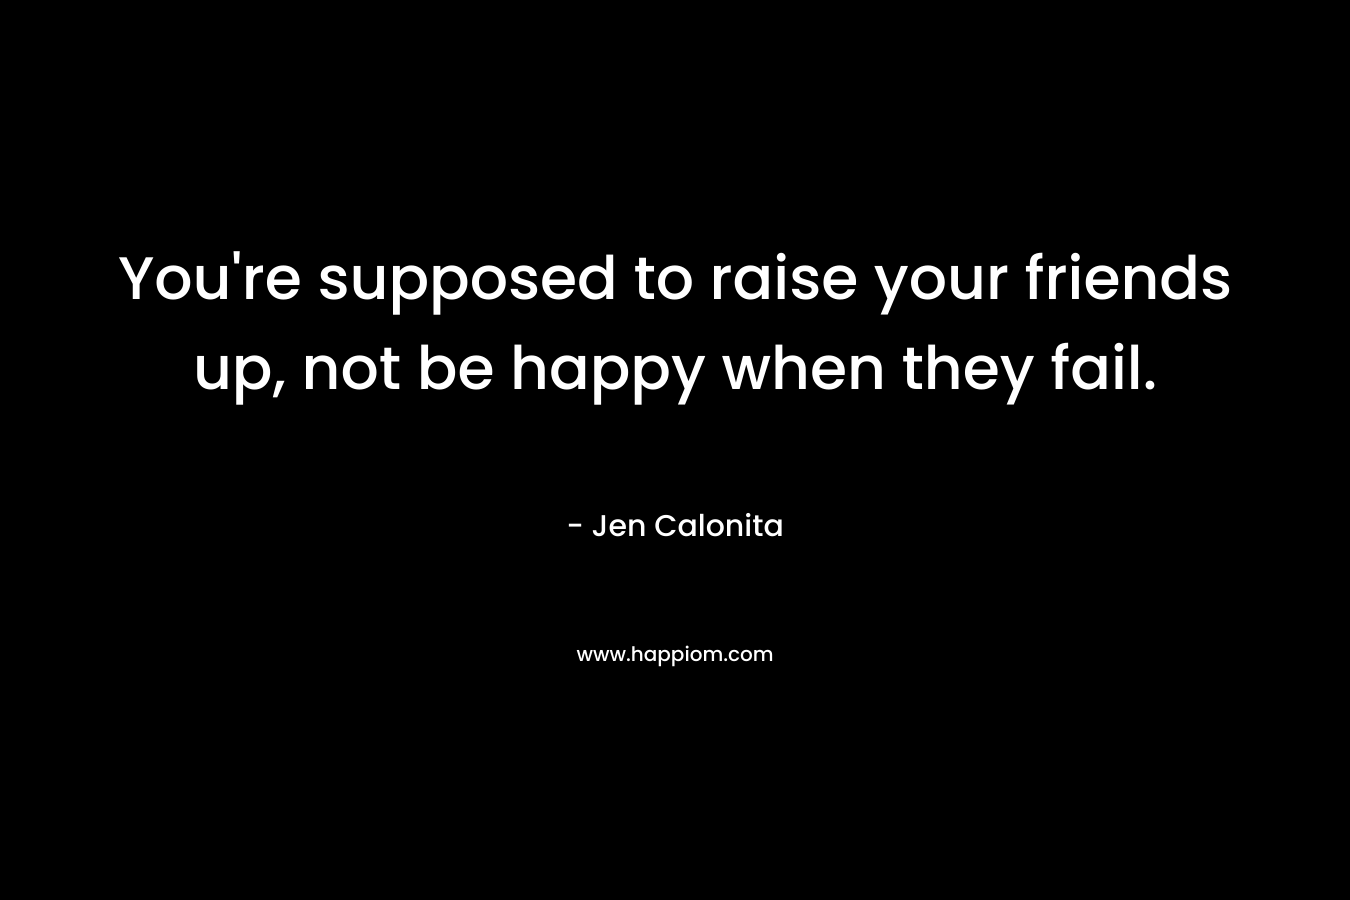 You’re supposed to raise your friends up, not be happy when they fail. – Jen Calonita